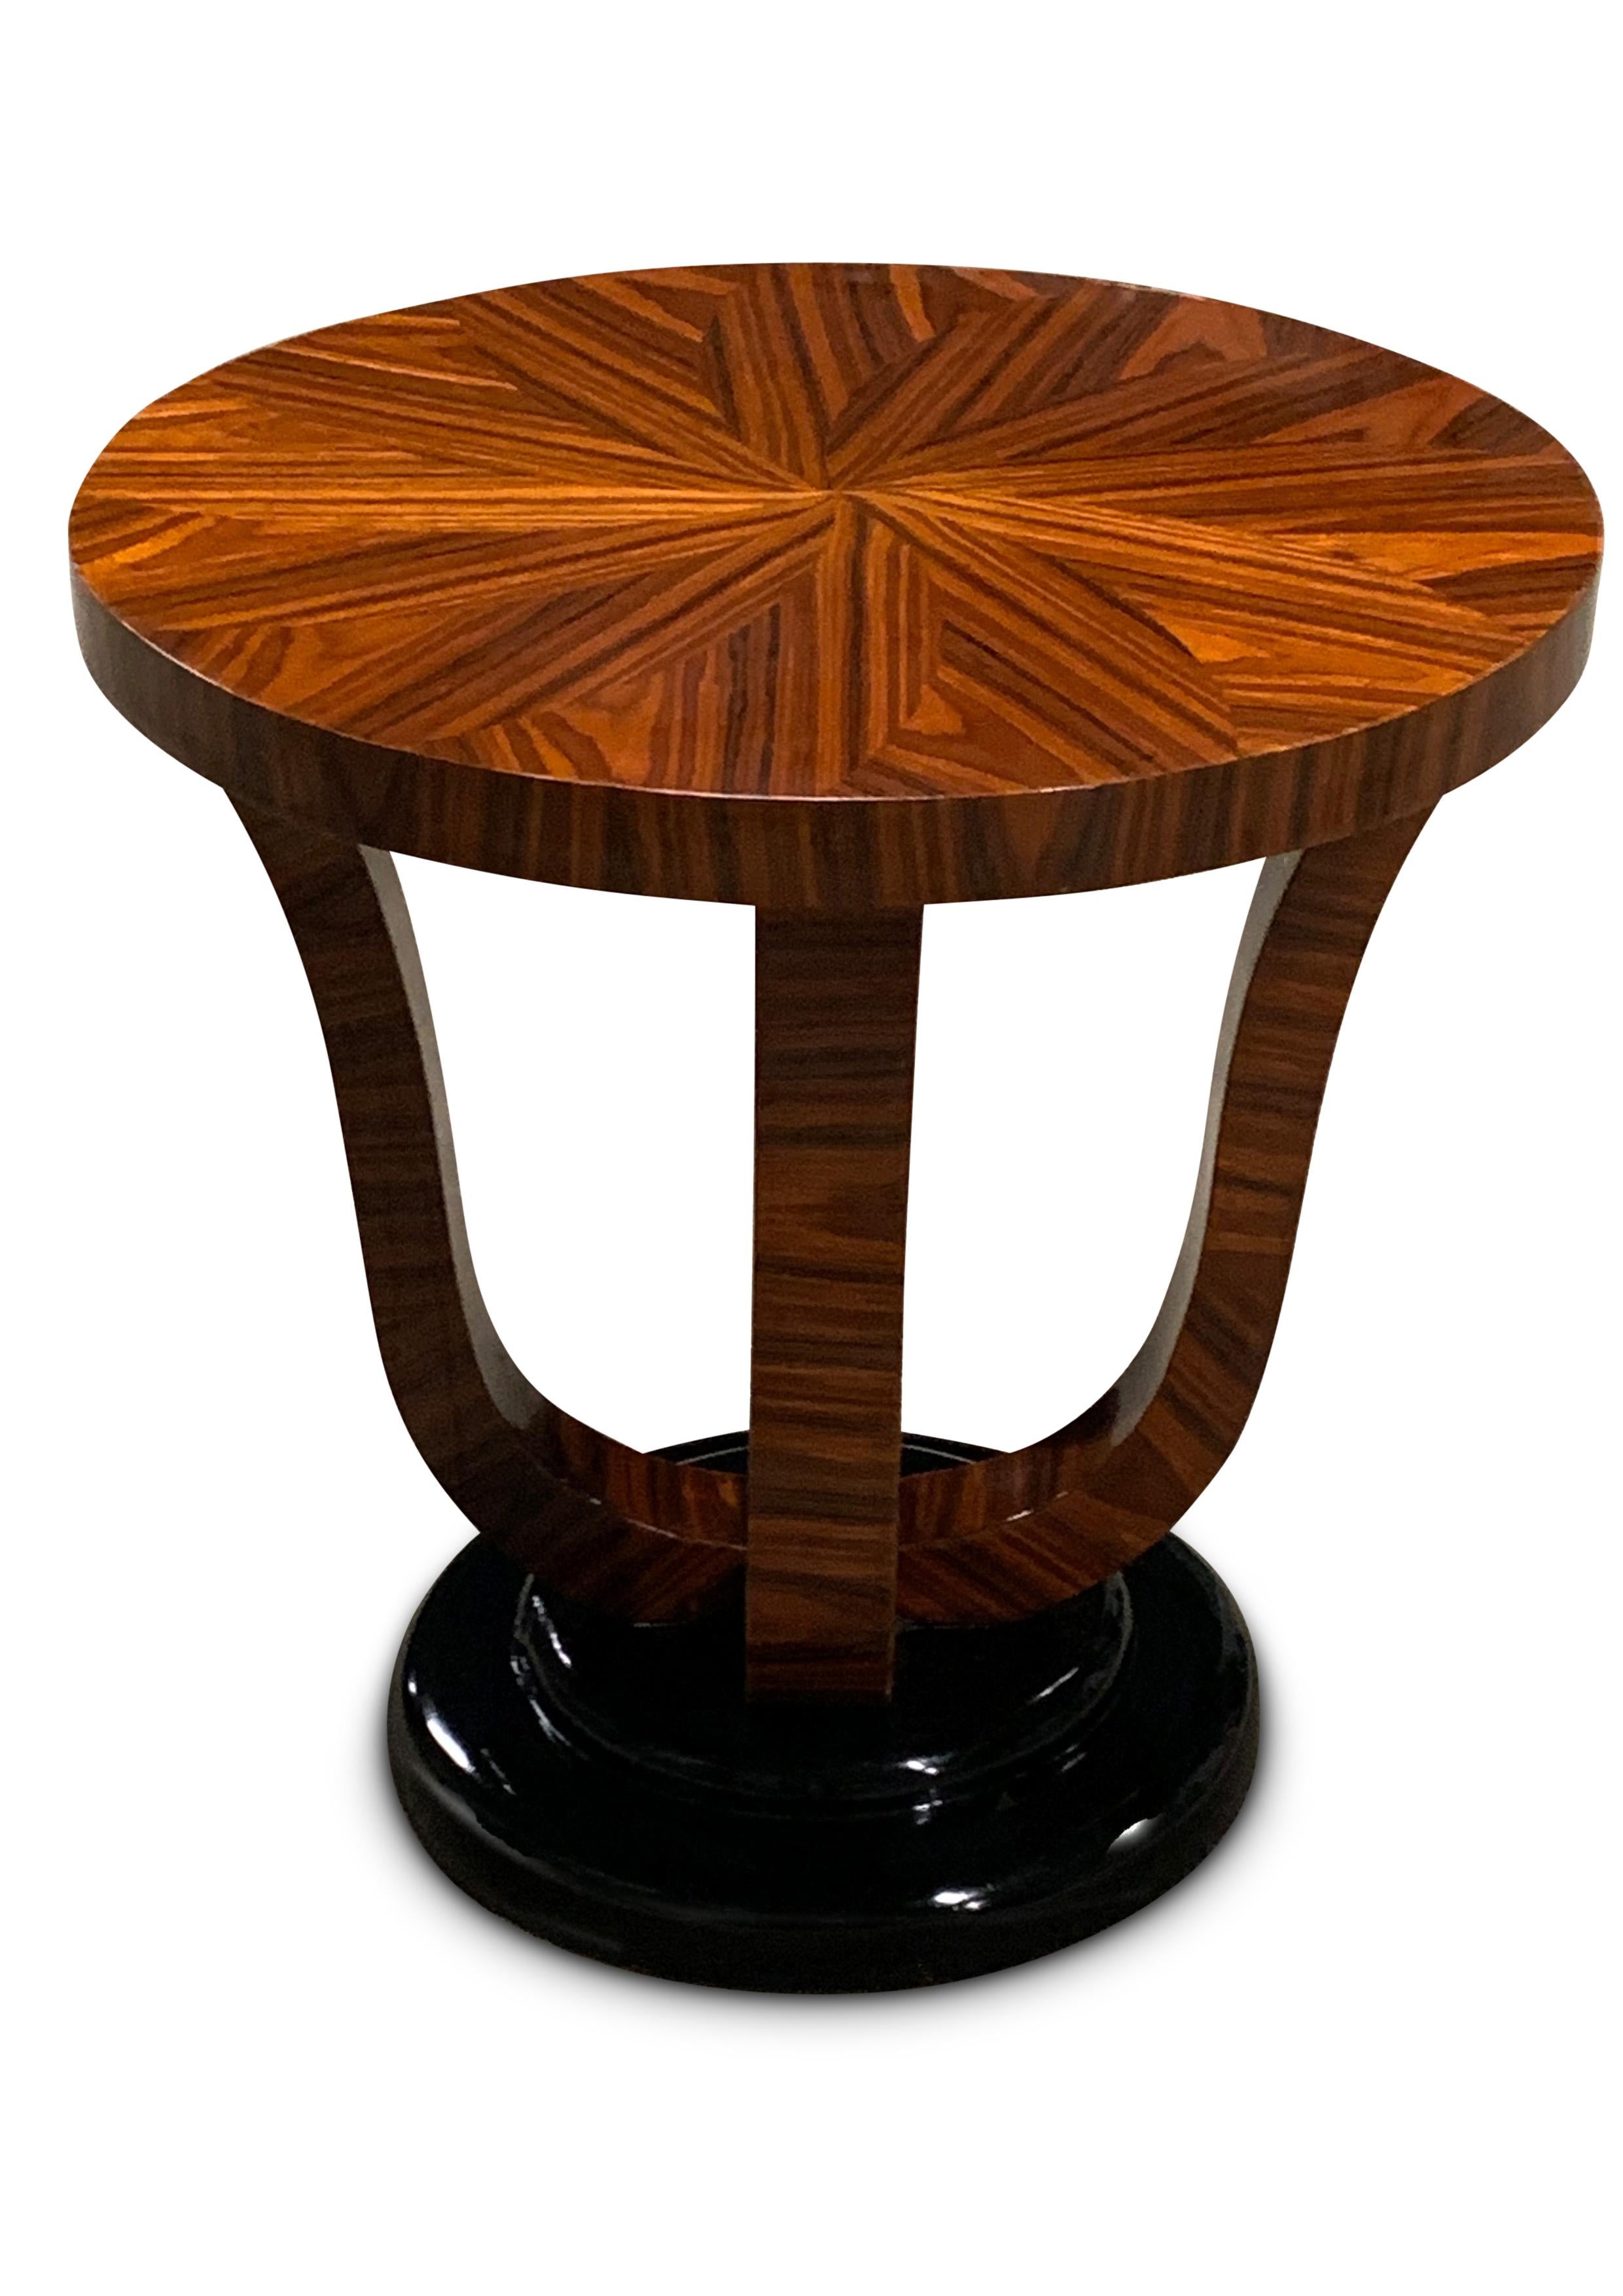 Lacquer Jules Leleu Style Art Deco Pedestal Table With A Beautiful Rosewood Sunburst Top For Sale